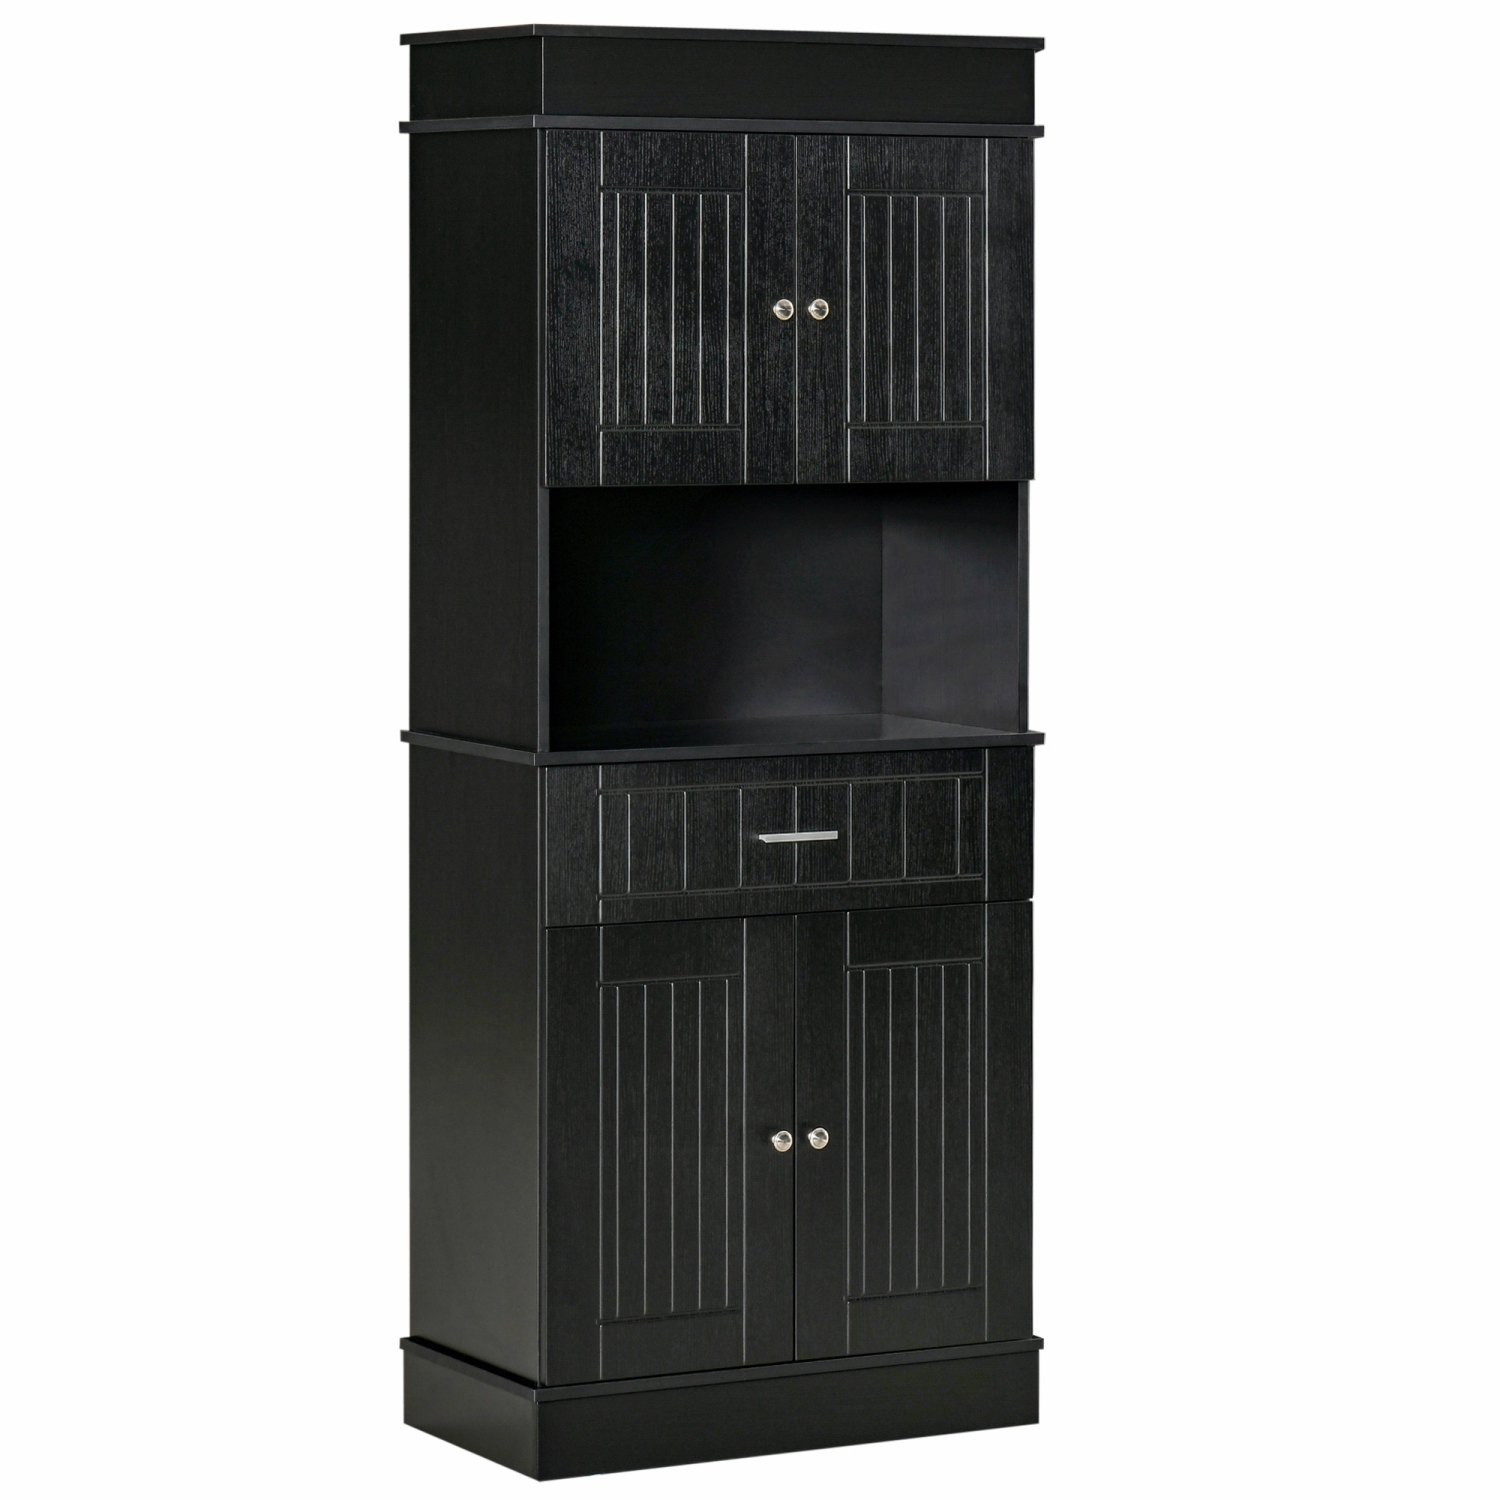 HOMCOM 72" Kitchen Pantry Cabinet, Freestanding Buffet with Hutch, Cupboard with Adjustable Shelf, Utility Drawer, 2 Door Cabinets and Countertop, Black Wood Grain